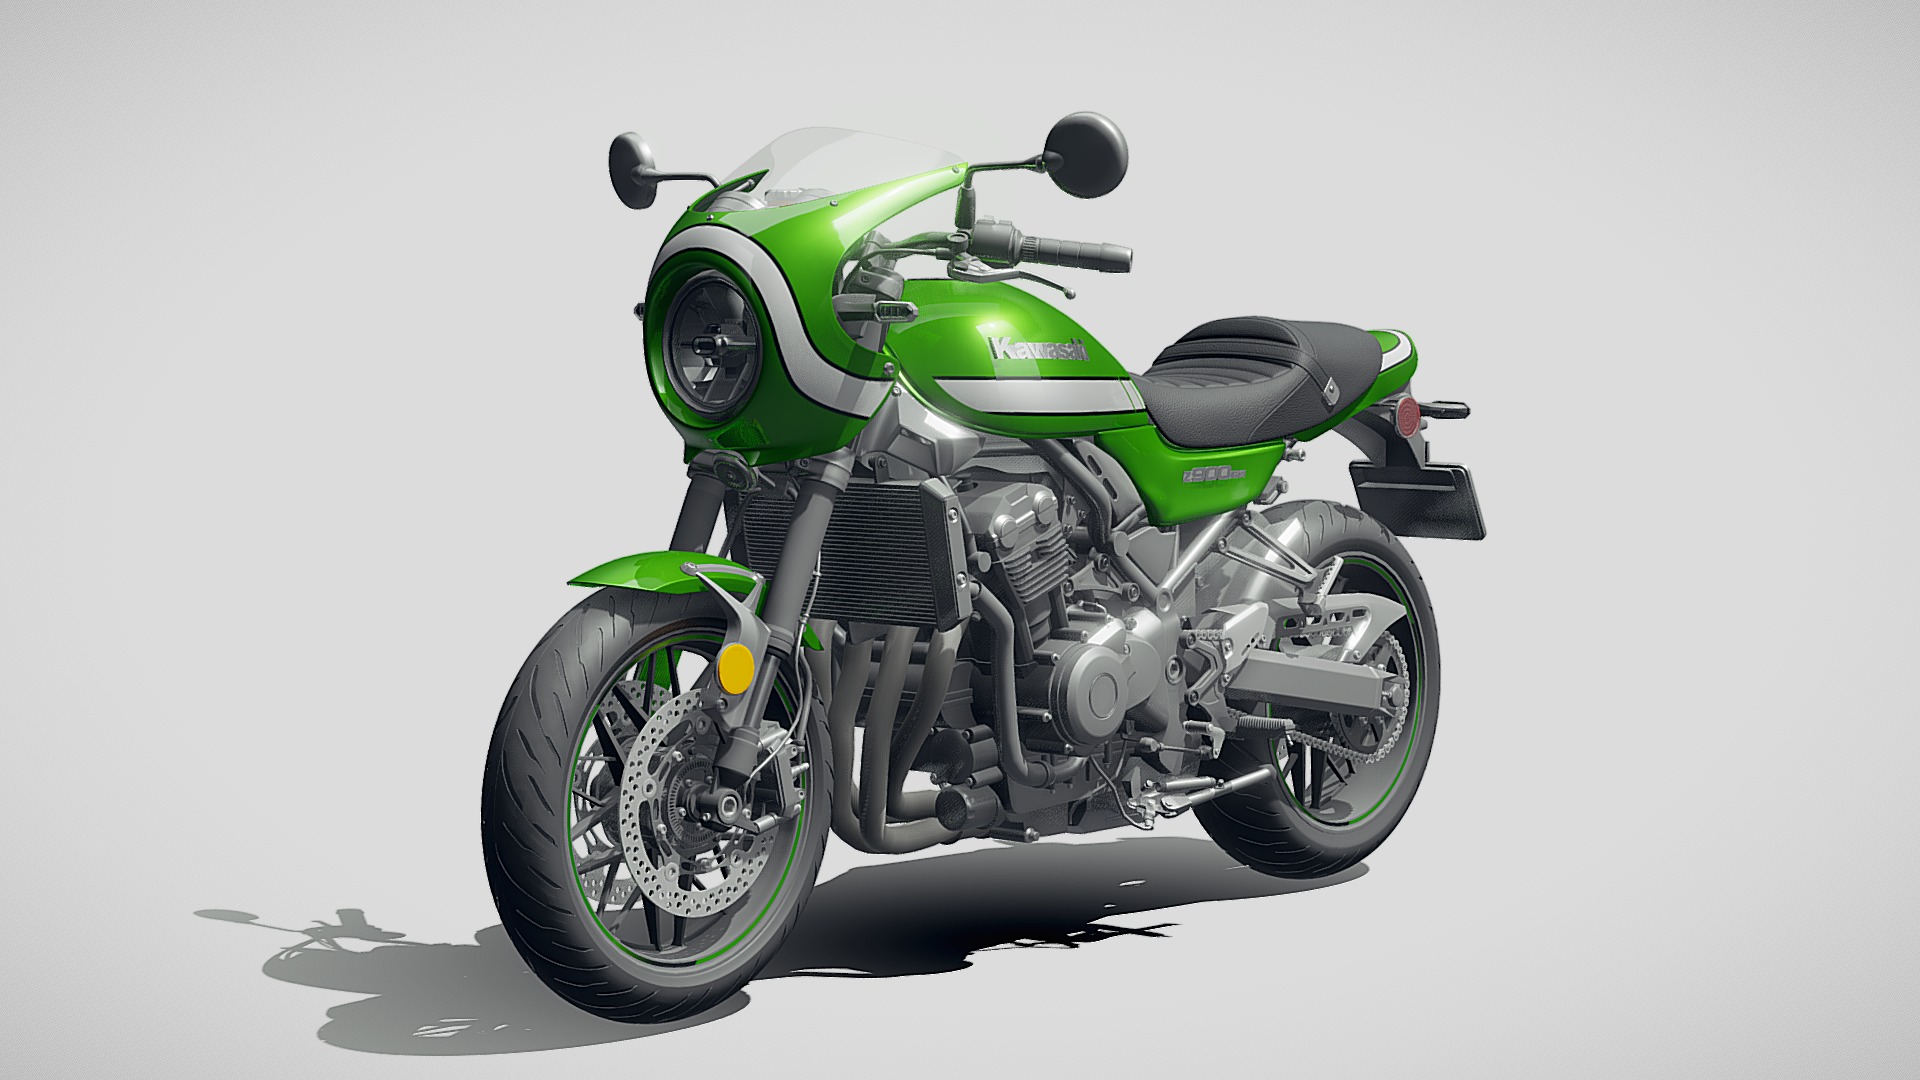 3D model Kawasaki Z900RS 2019 - This is a 3D model of the Kawasaki Z900RS 2019. The 3D model is about a green and black motorcycle.